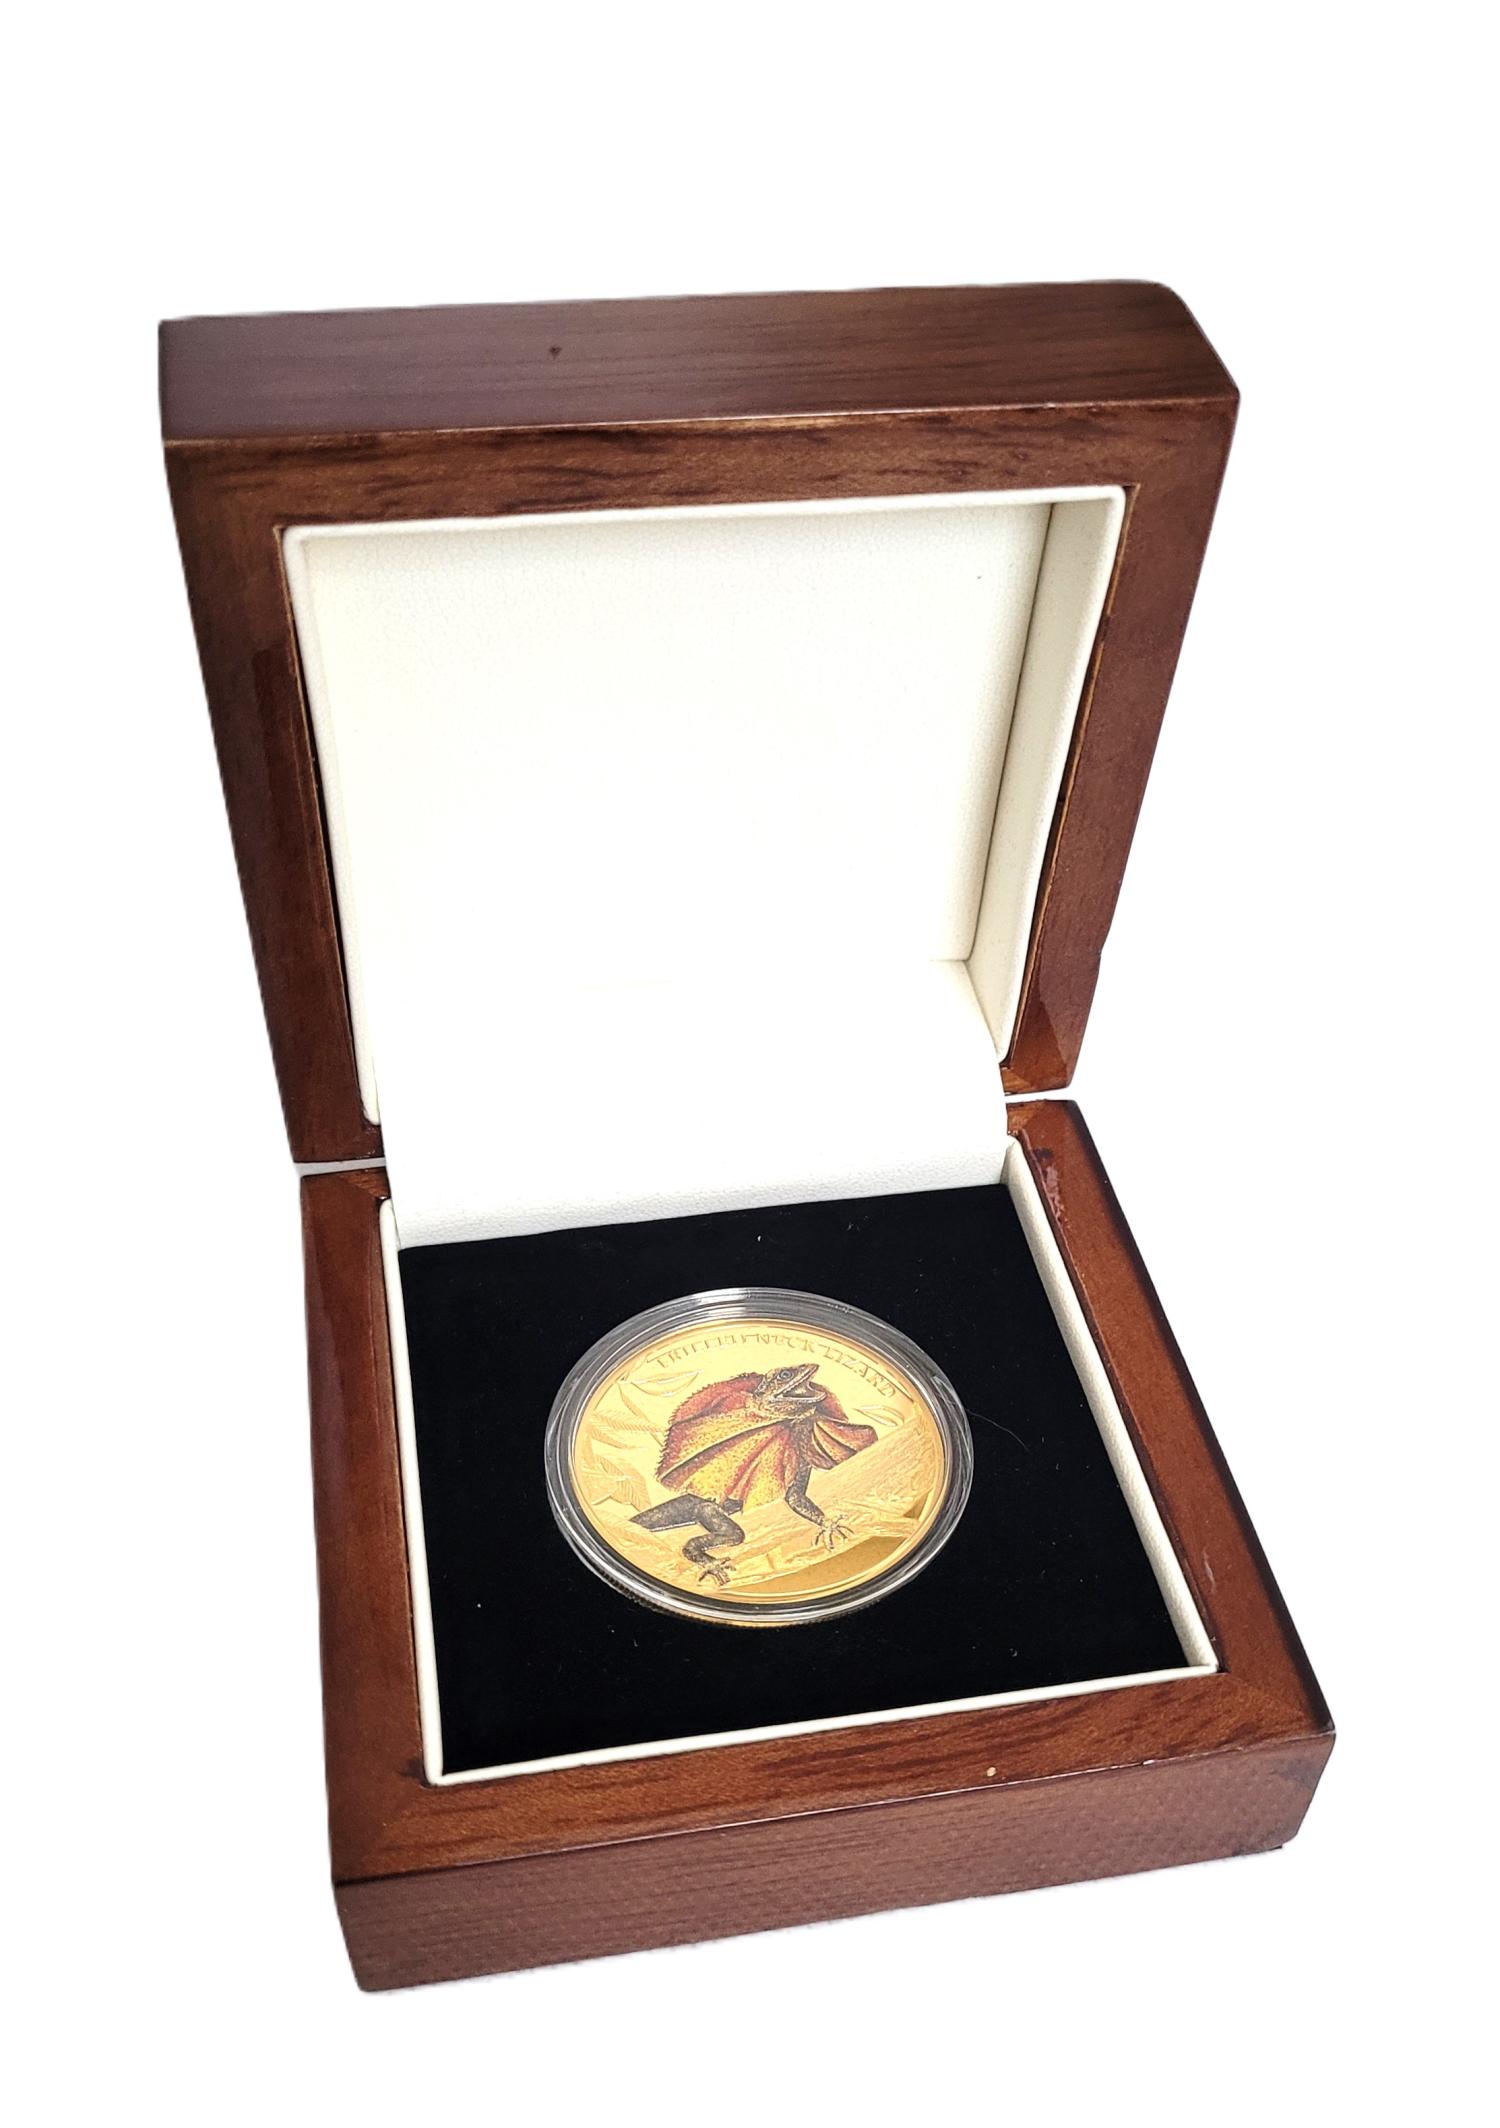 Thumbnail for 2014 The Frilled Neck LIZARD 1oz Gold Proof Coin